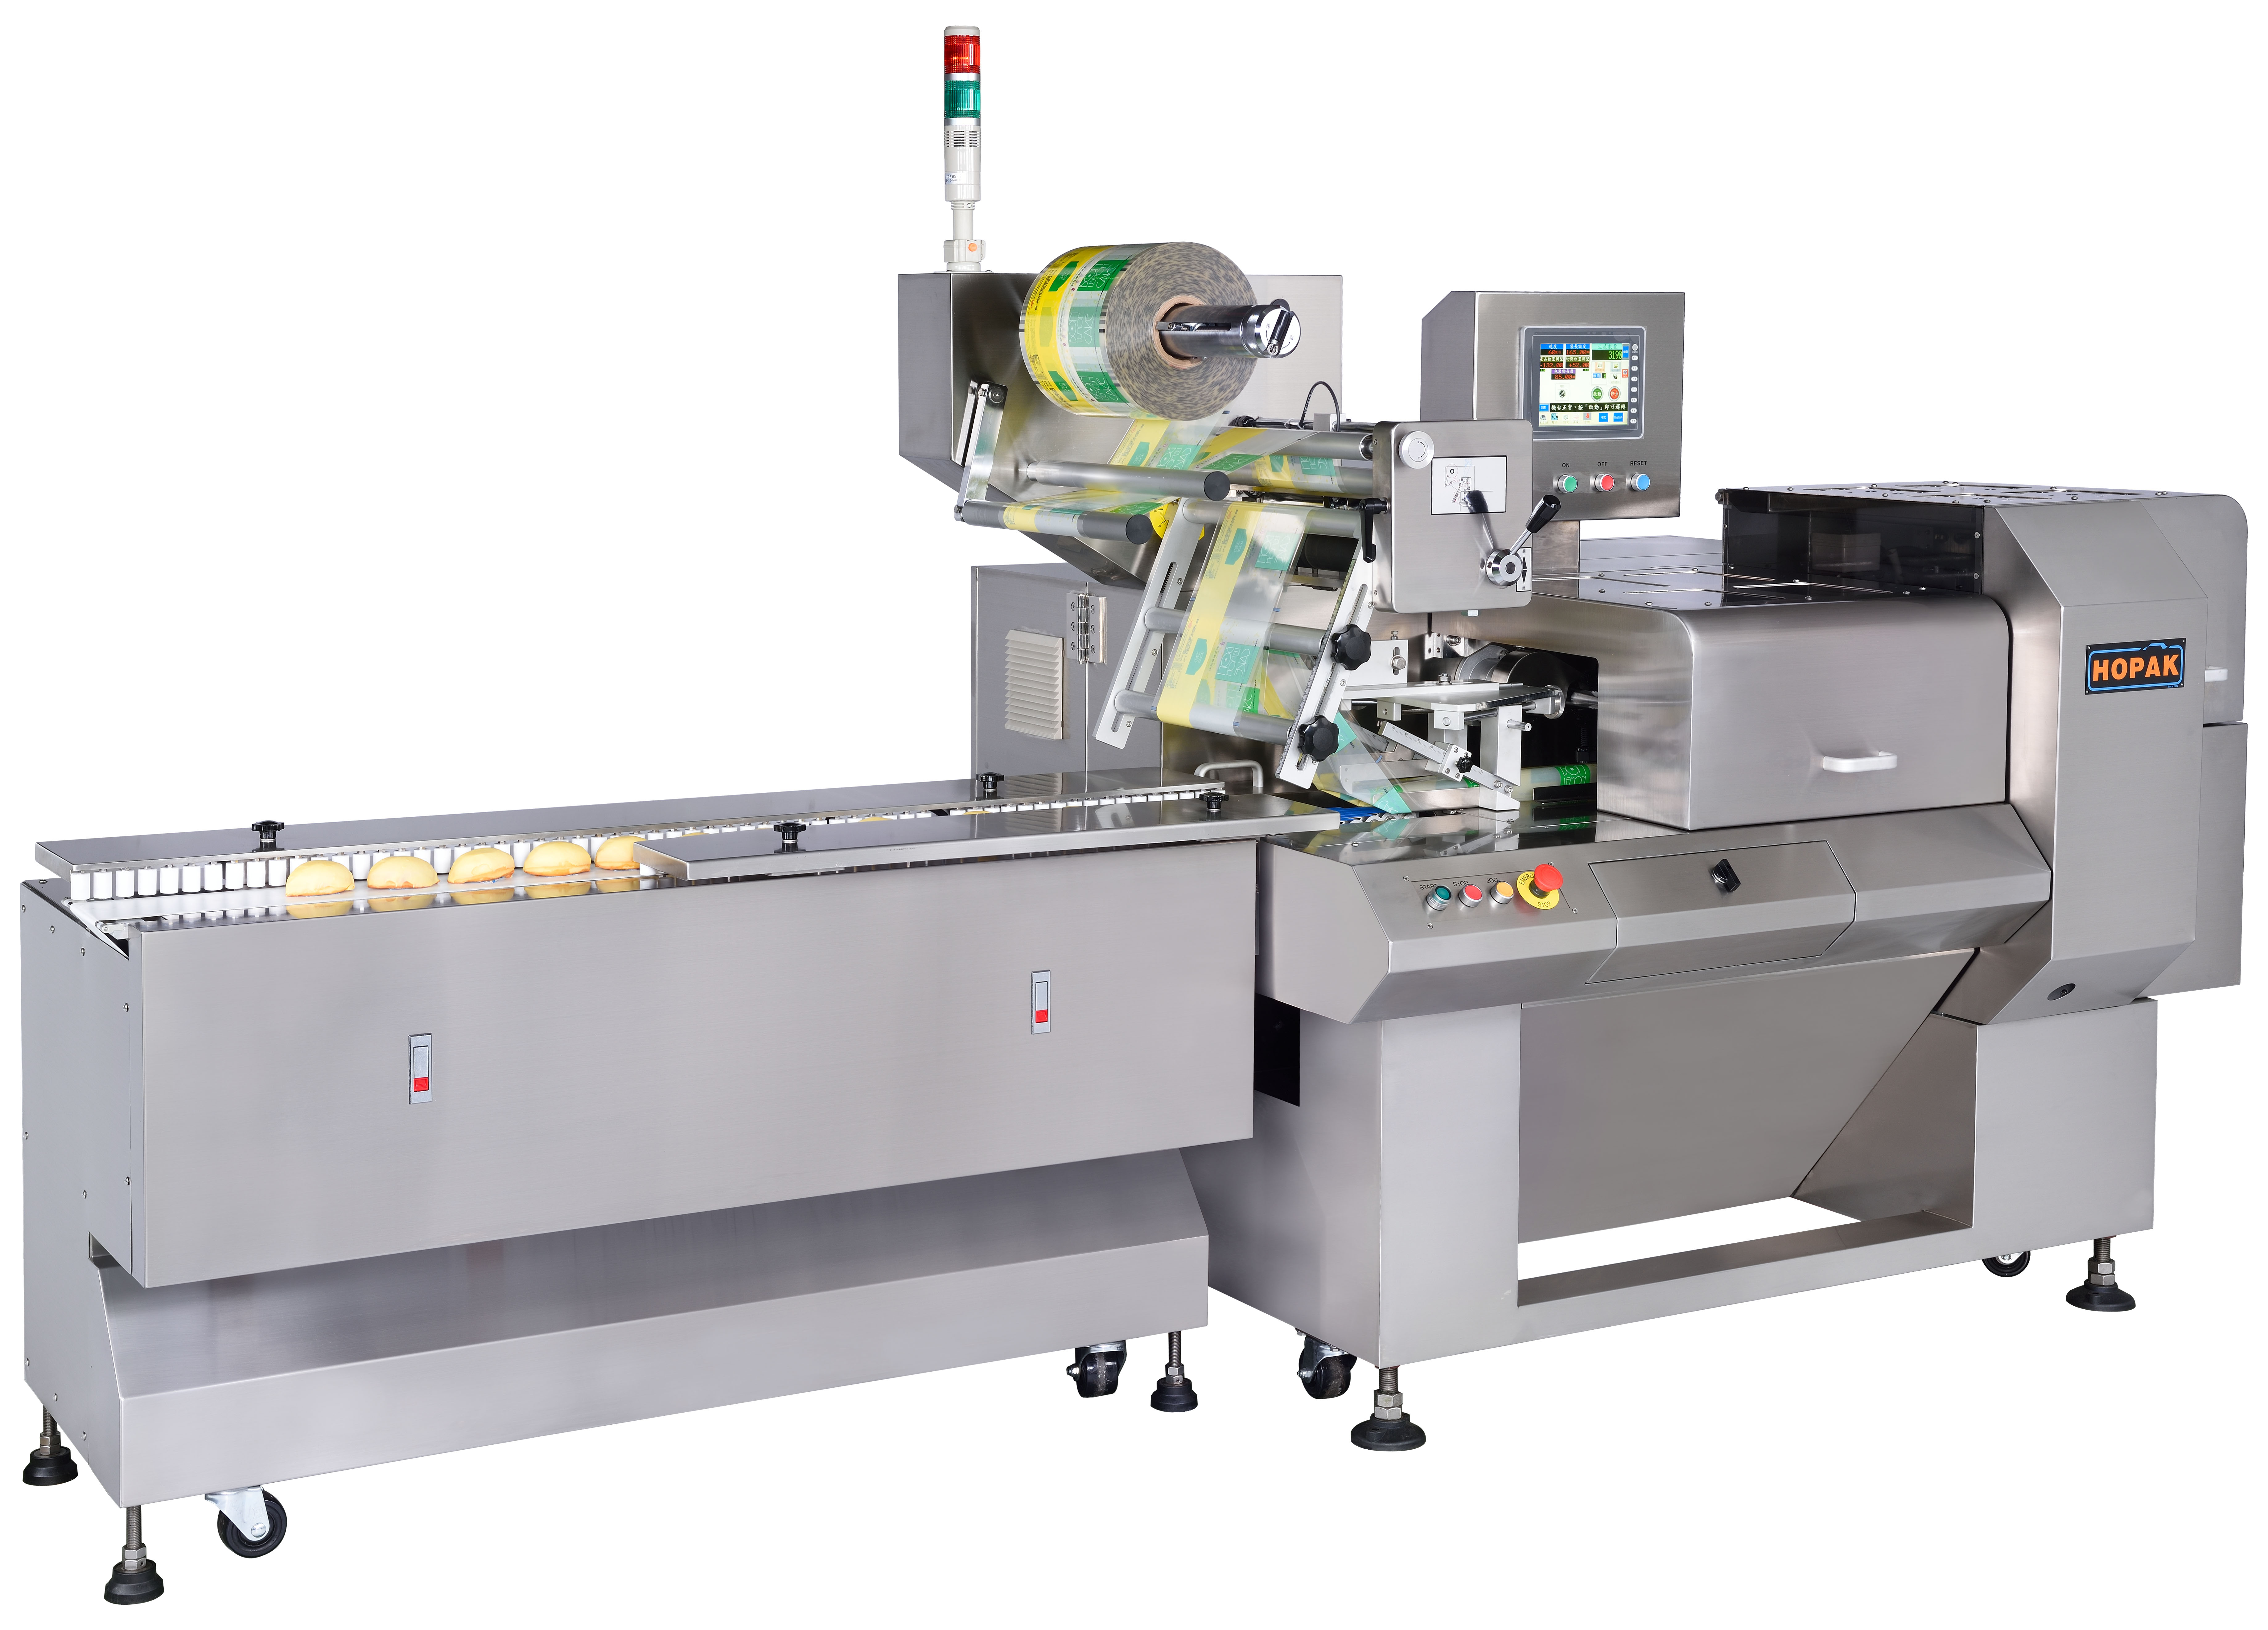 packing machine for food products